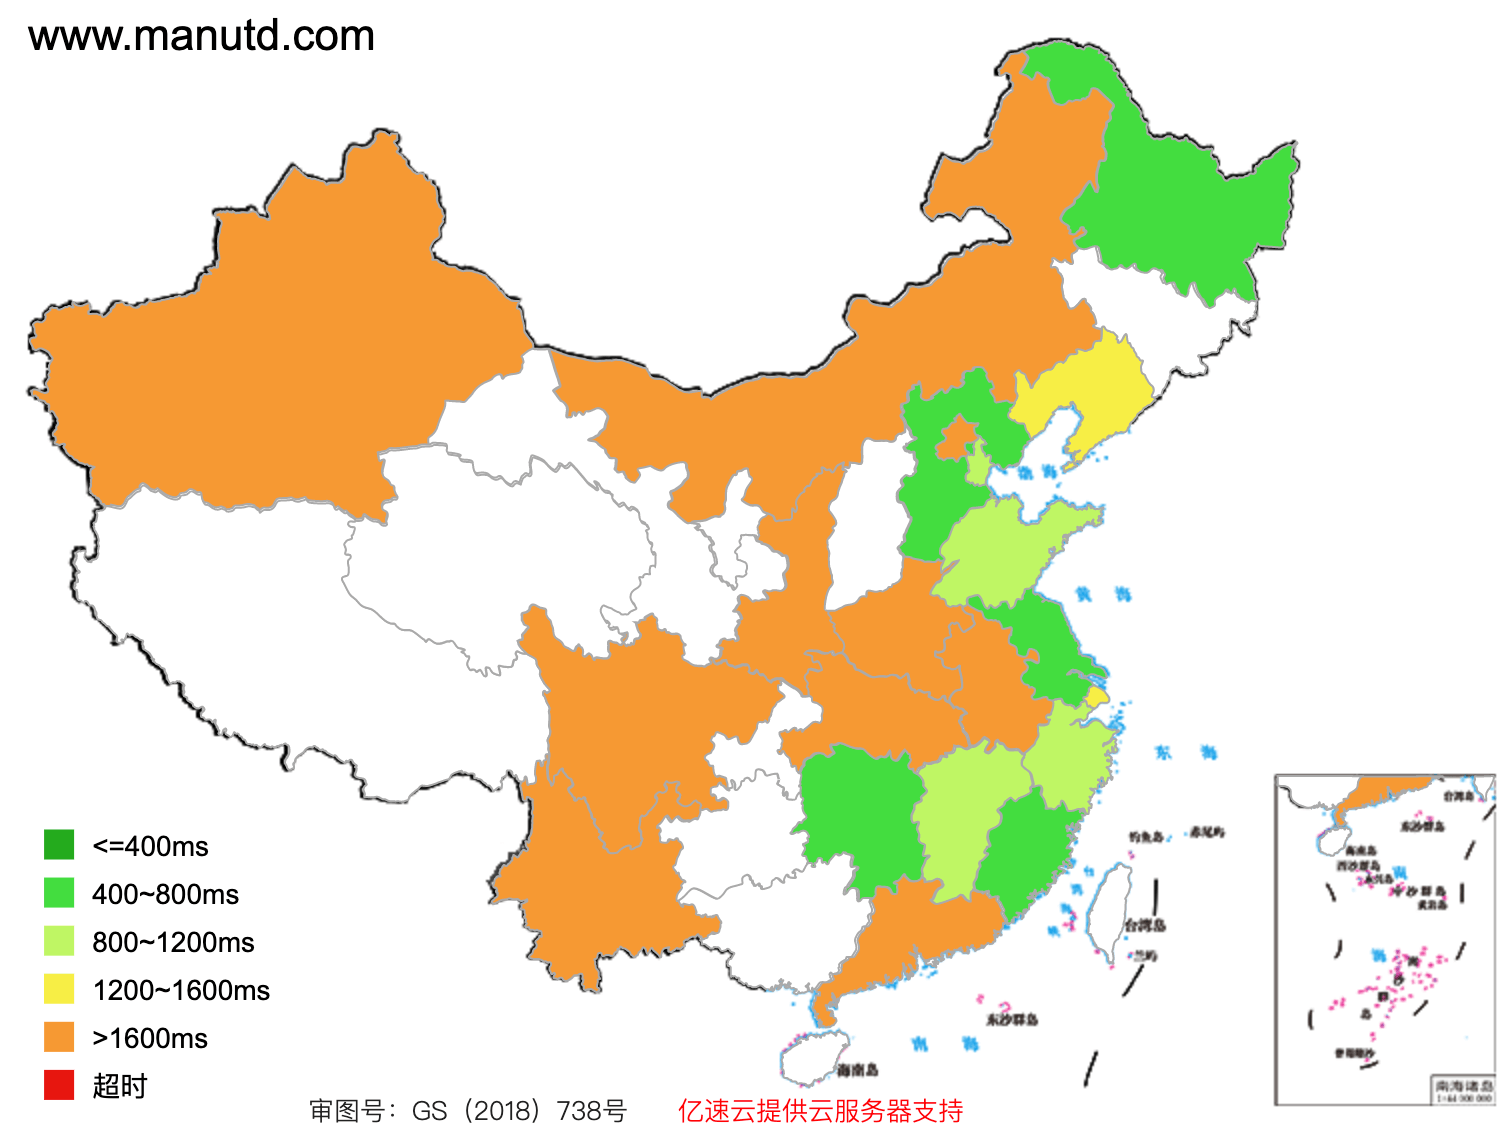 www.manutd.com access speed across mainland China (green: fast, red: slow)